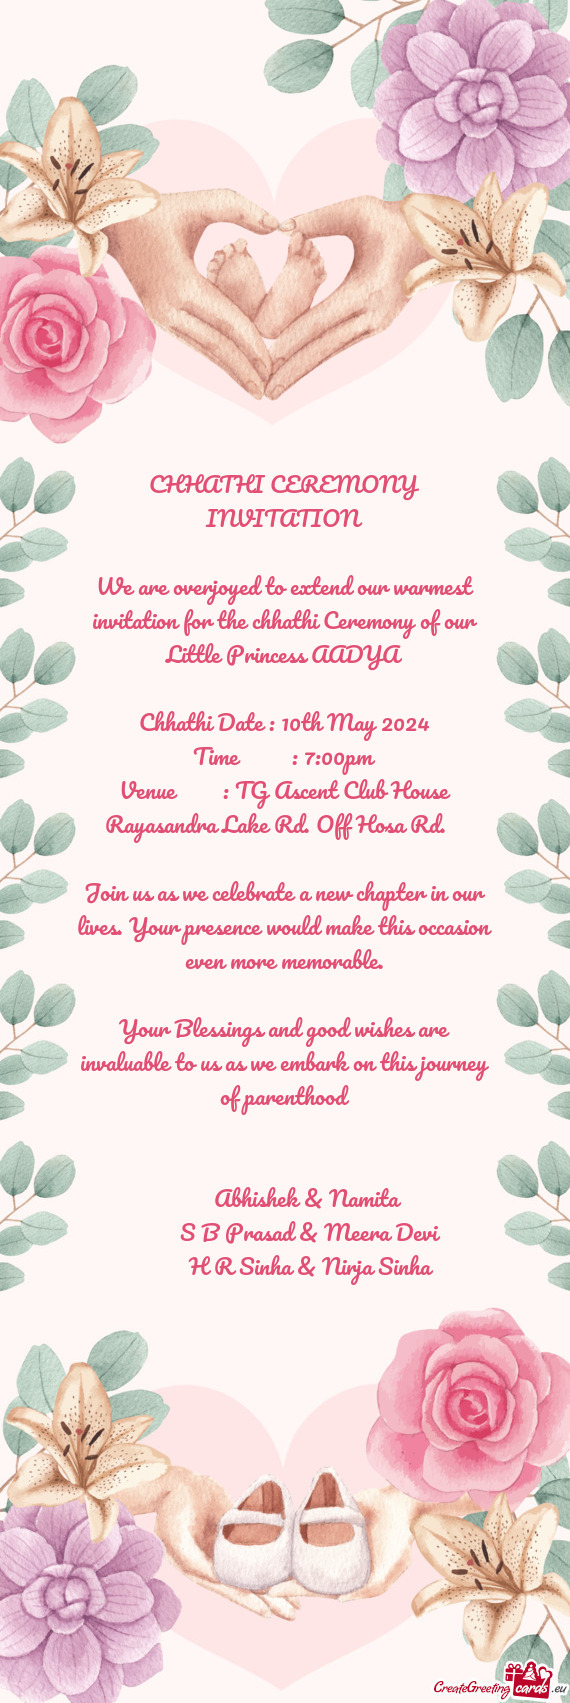 We are overjoyed to extend our warmest invitation for the chhathi Ceremony of our Little Princess AA